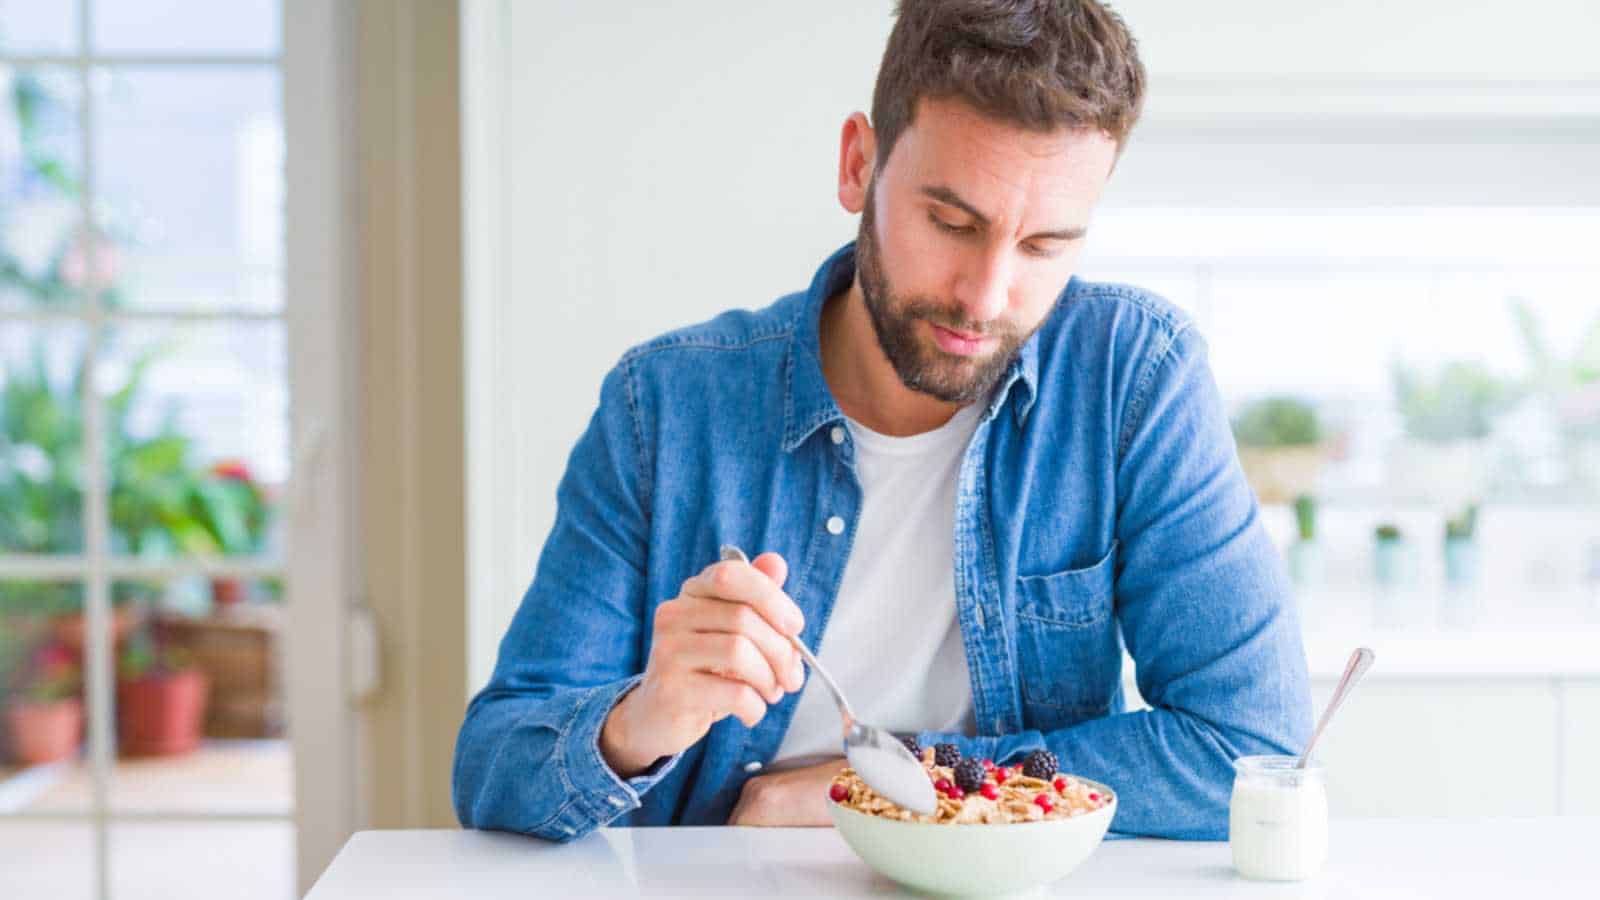 Man eating cereal